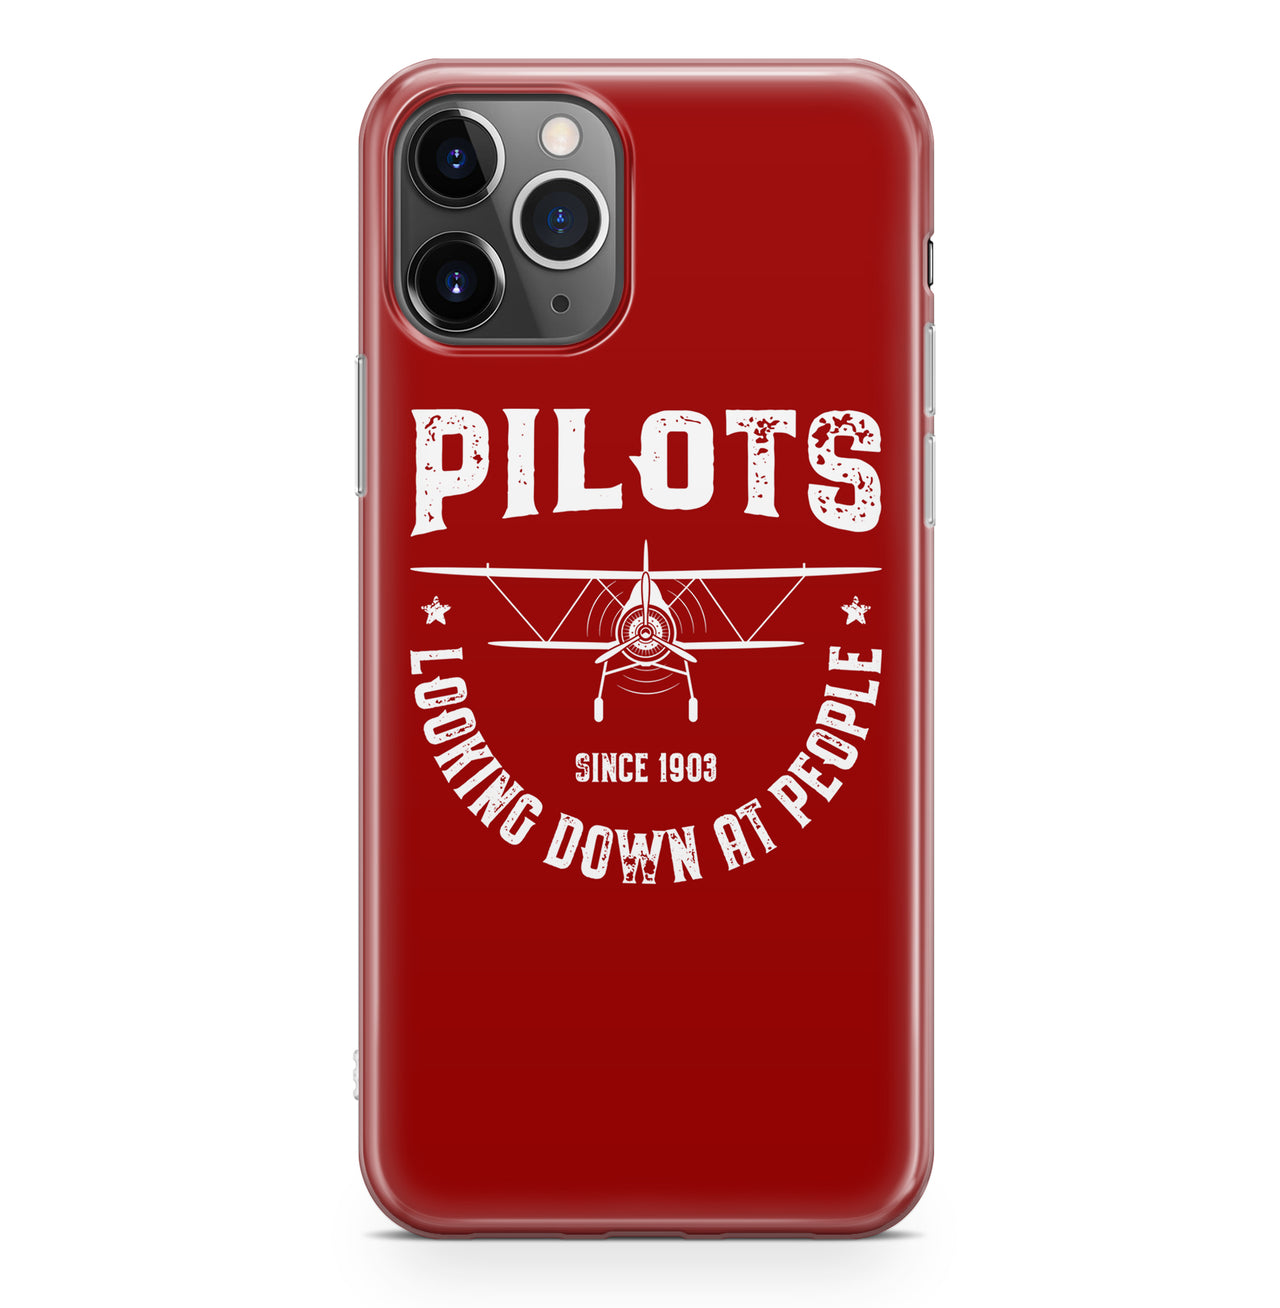 Pilots Looking Down at People Since 1903 Designed iPhone Cases